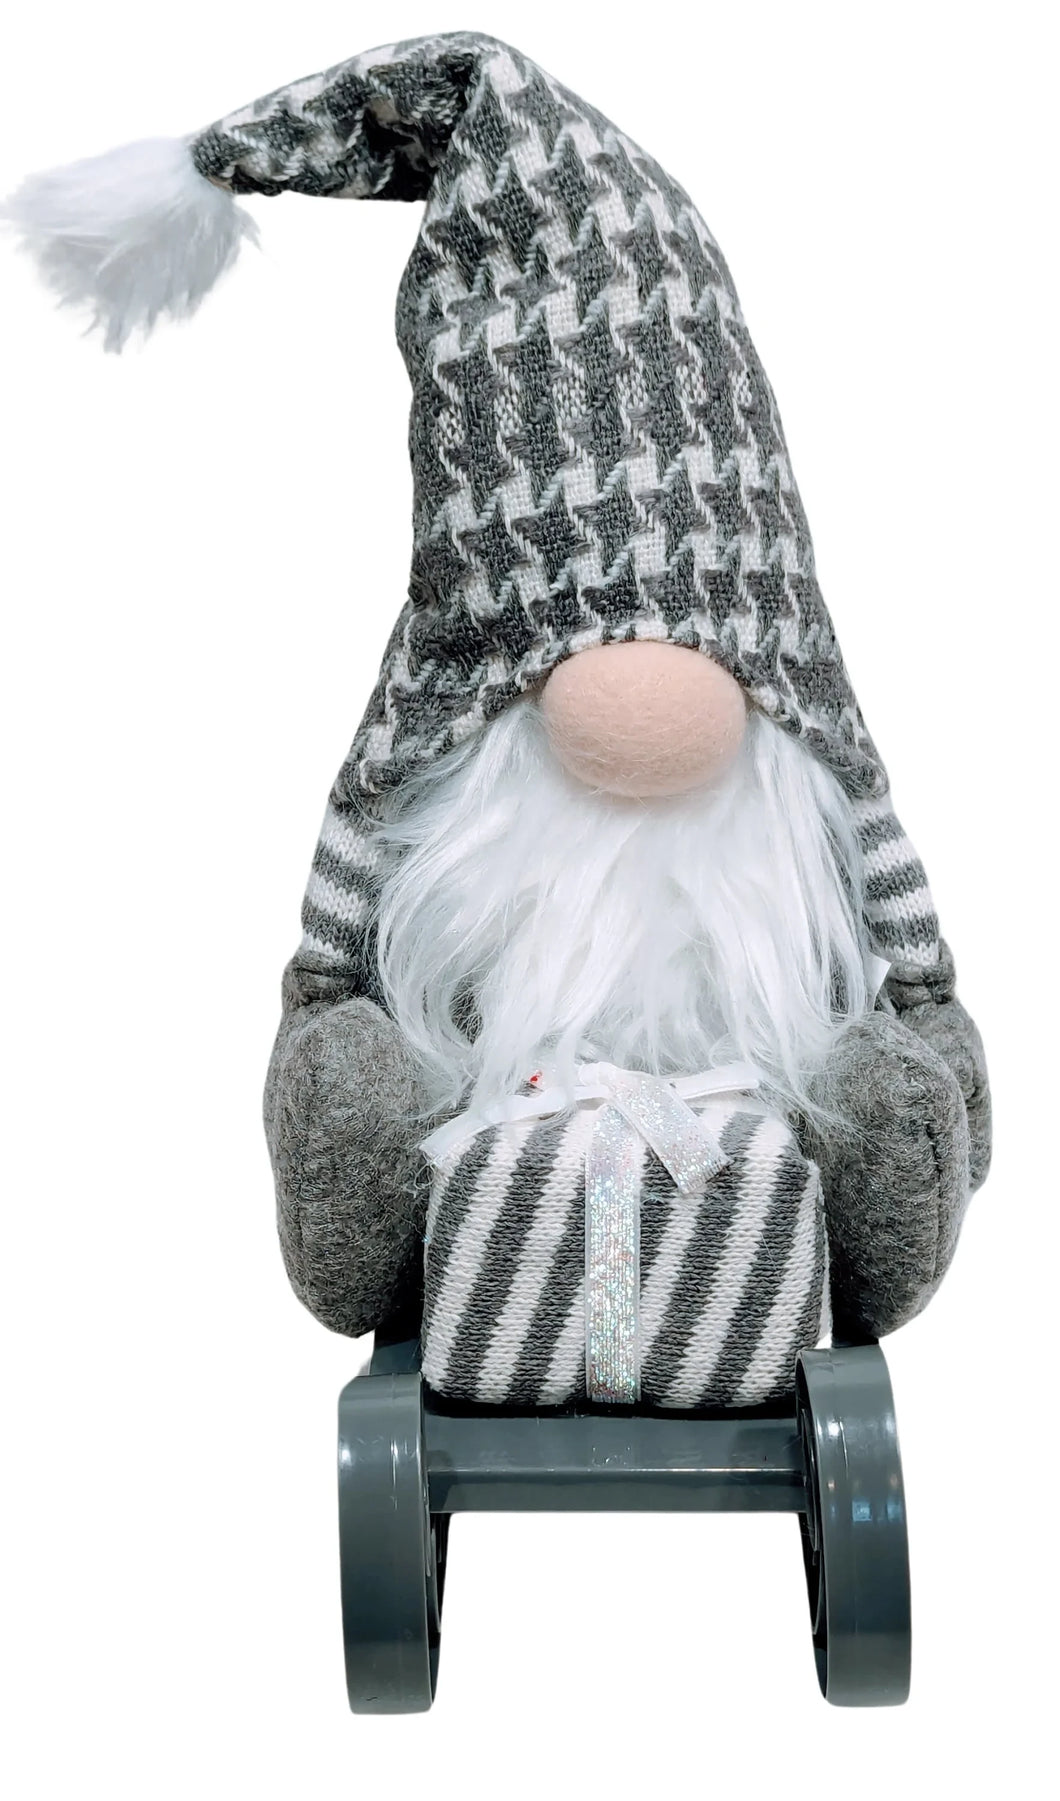 Gray Gnome Sitting on Gray Sled Holding a Christmas Gift